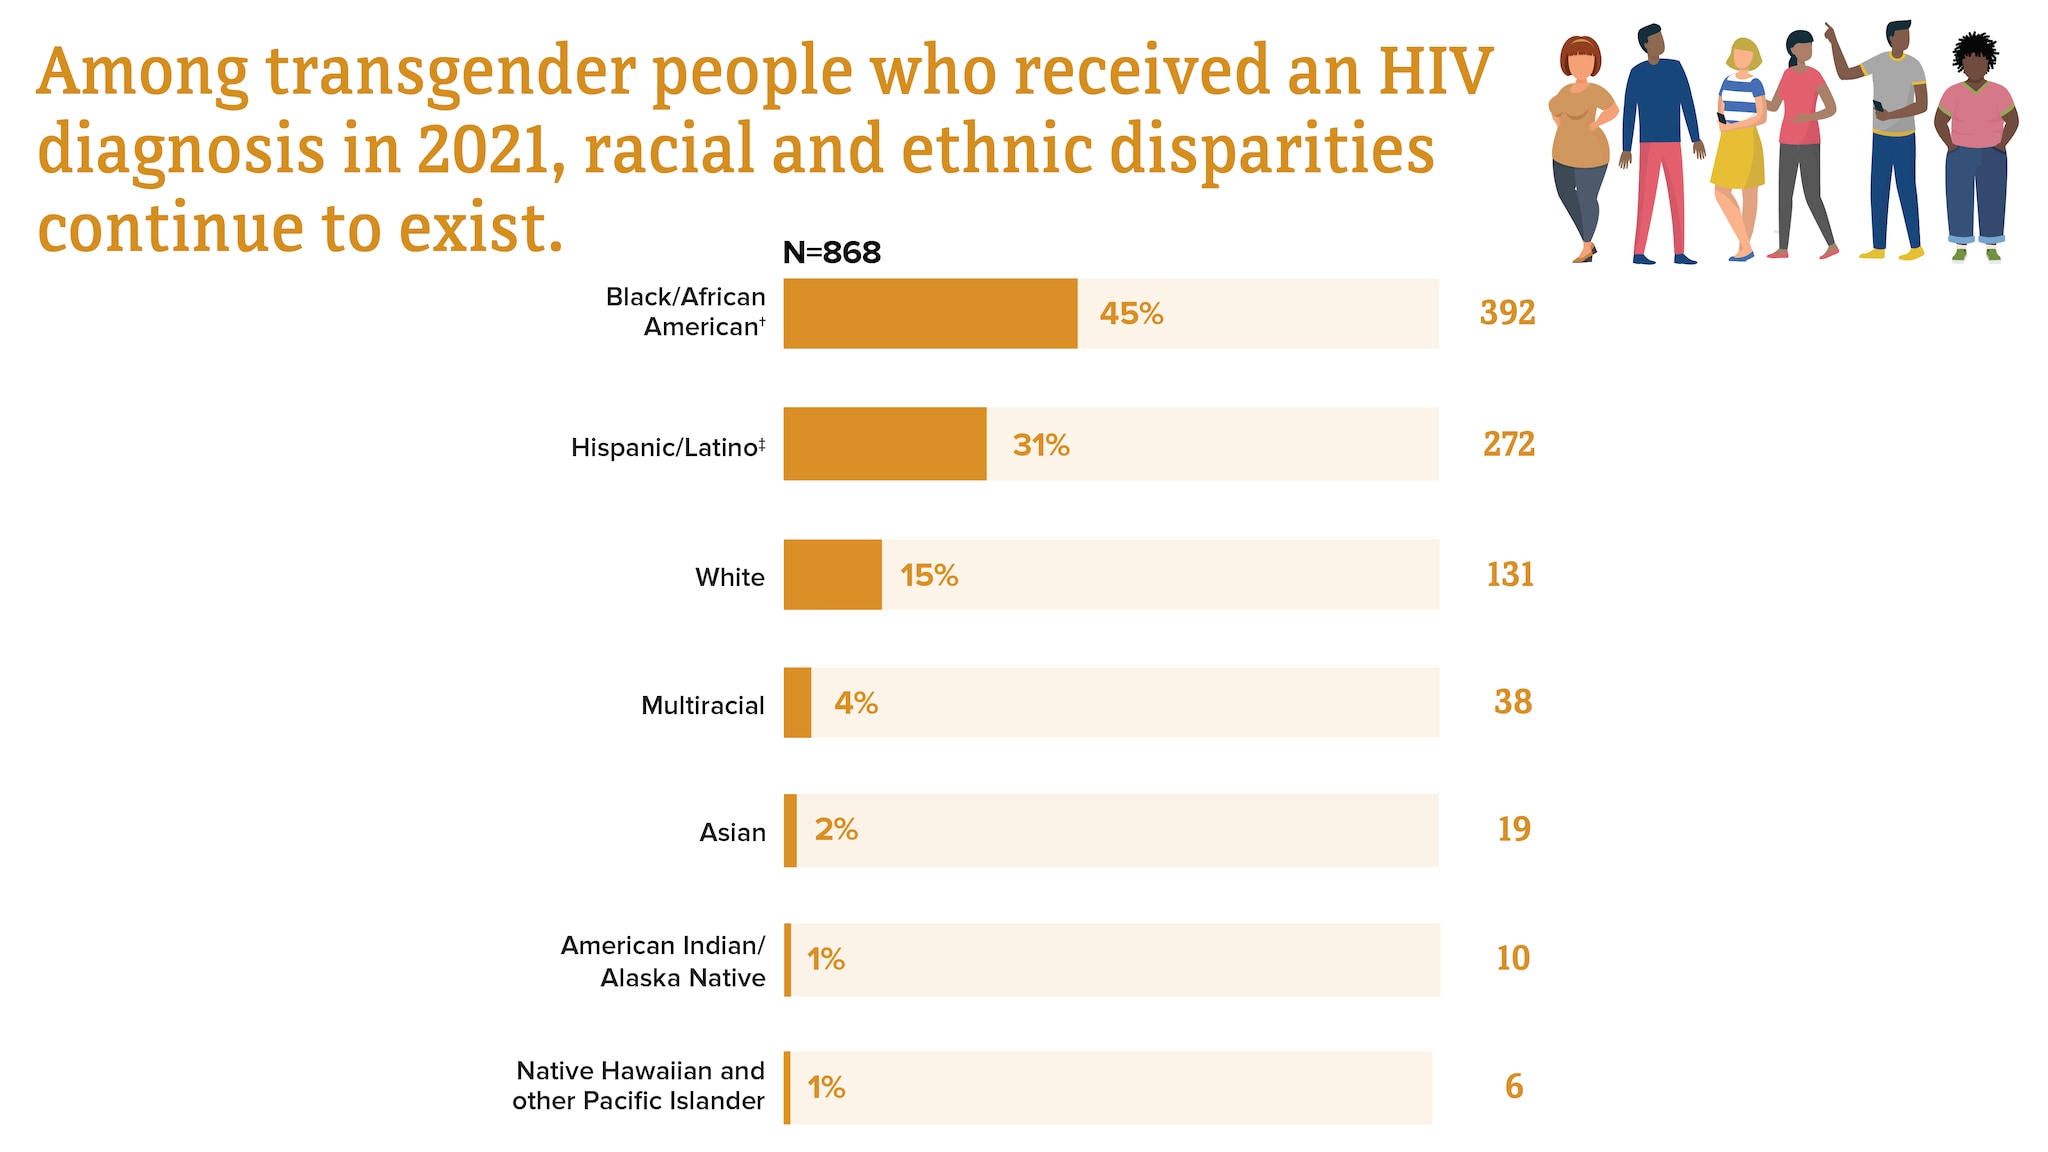 Among transgender people who received an HIV diagnosis in 2021, racial and ethnic disparities continue to exist. Black/African American transgender people were most affected, followed by transgender people who are Hispanic/Latino; White; Multiracial; Asian; American Indian/Alaska Native; and Native Hawaiian and other Pacific Islander, respectively.